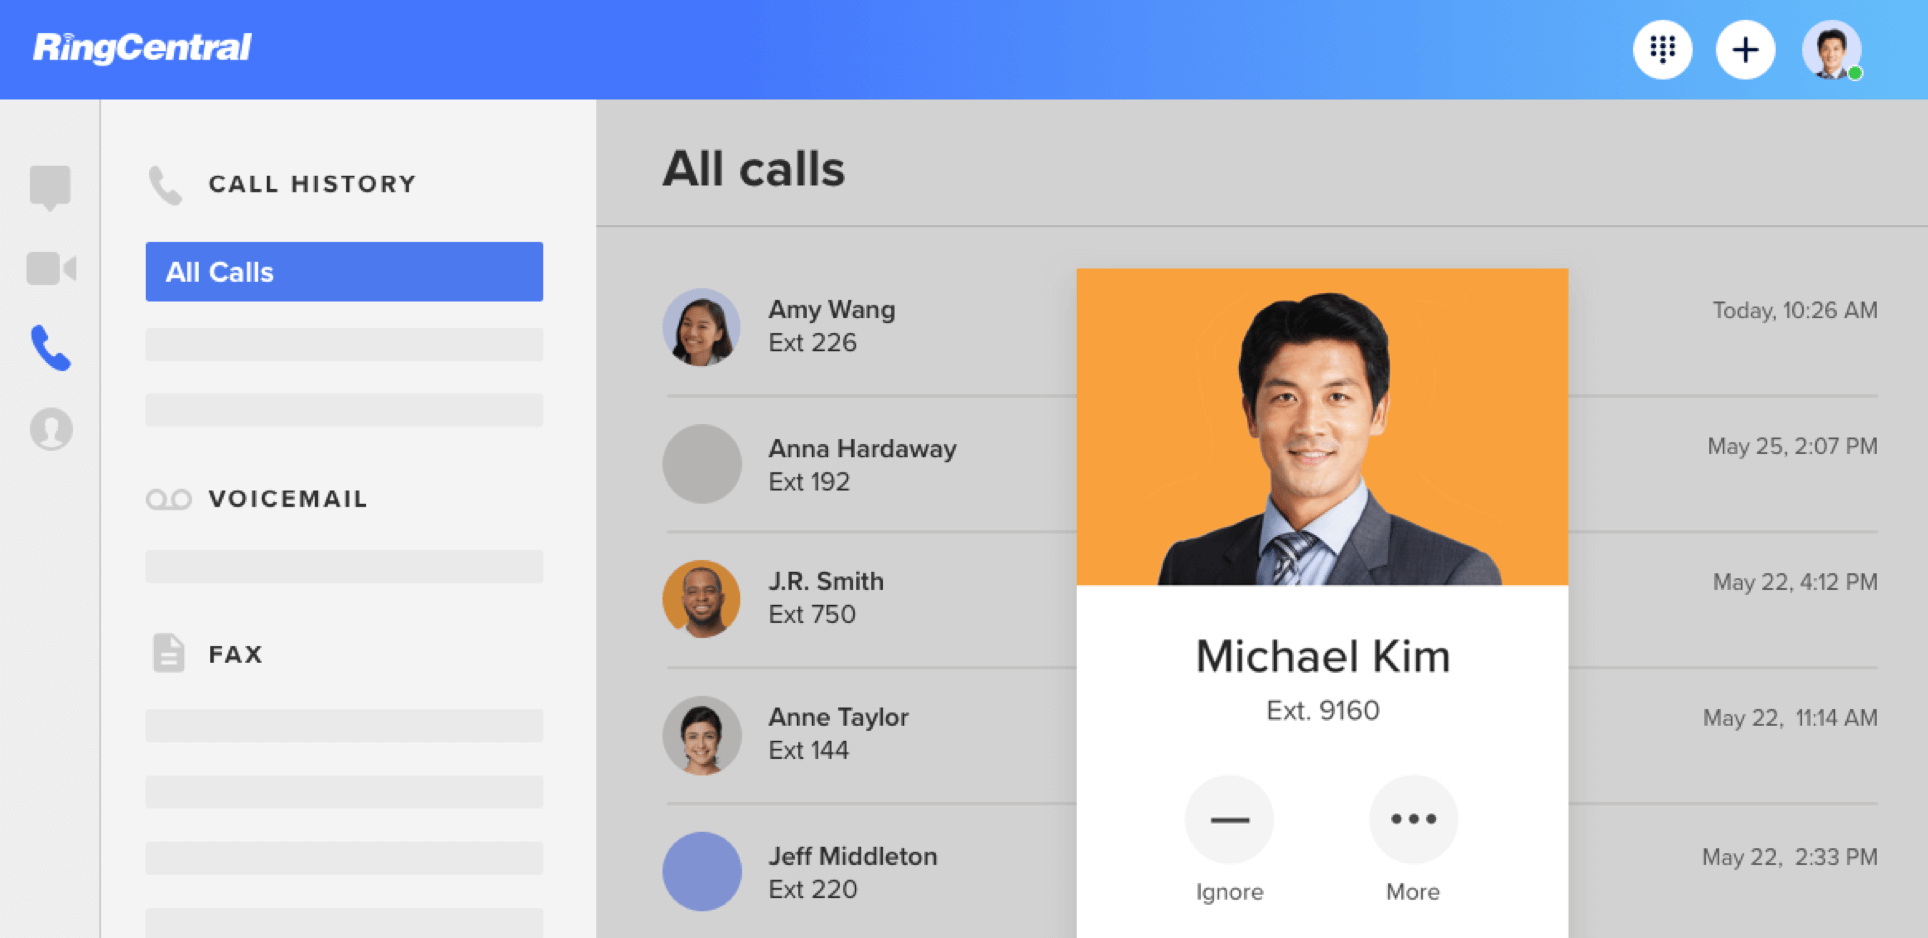 RingCentral call screen